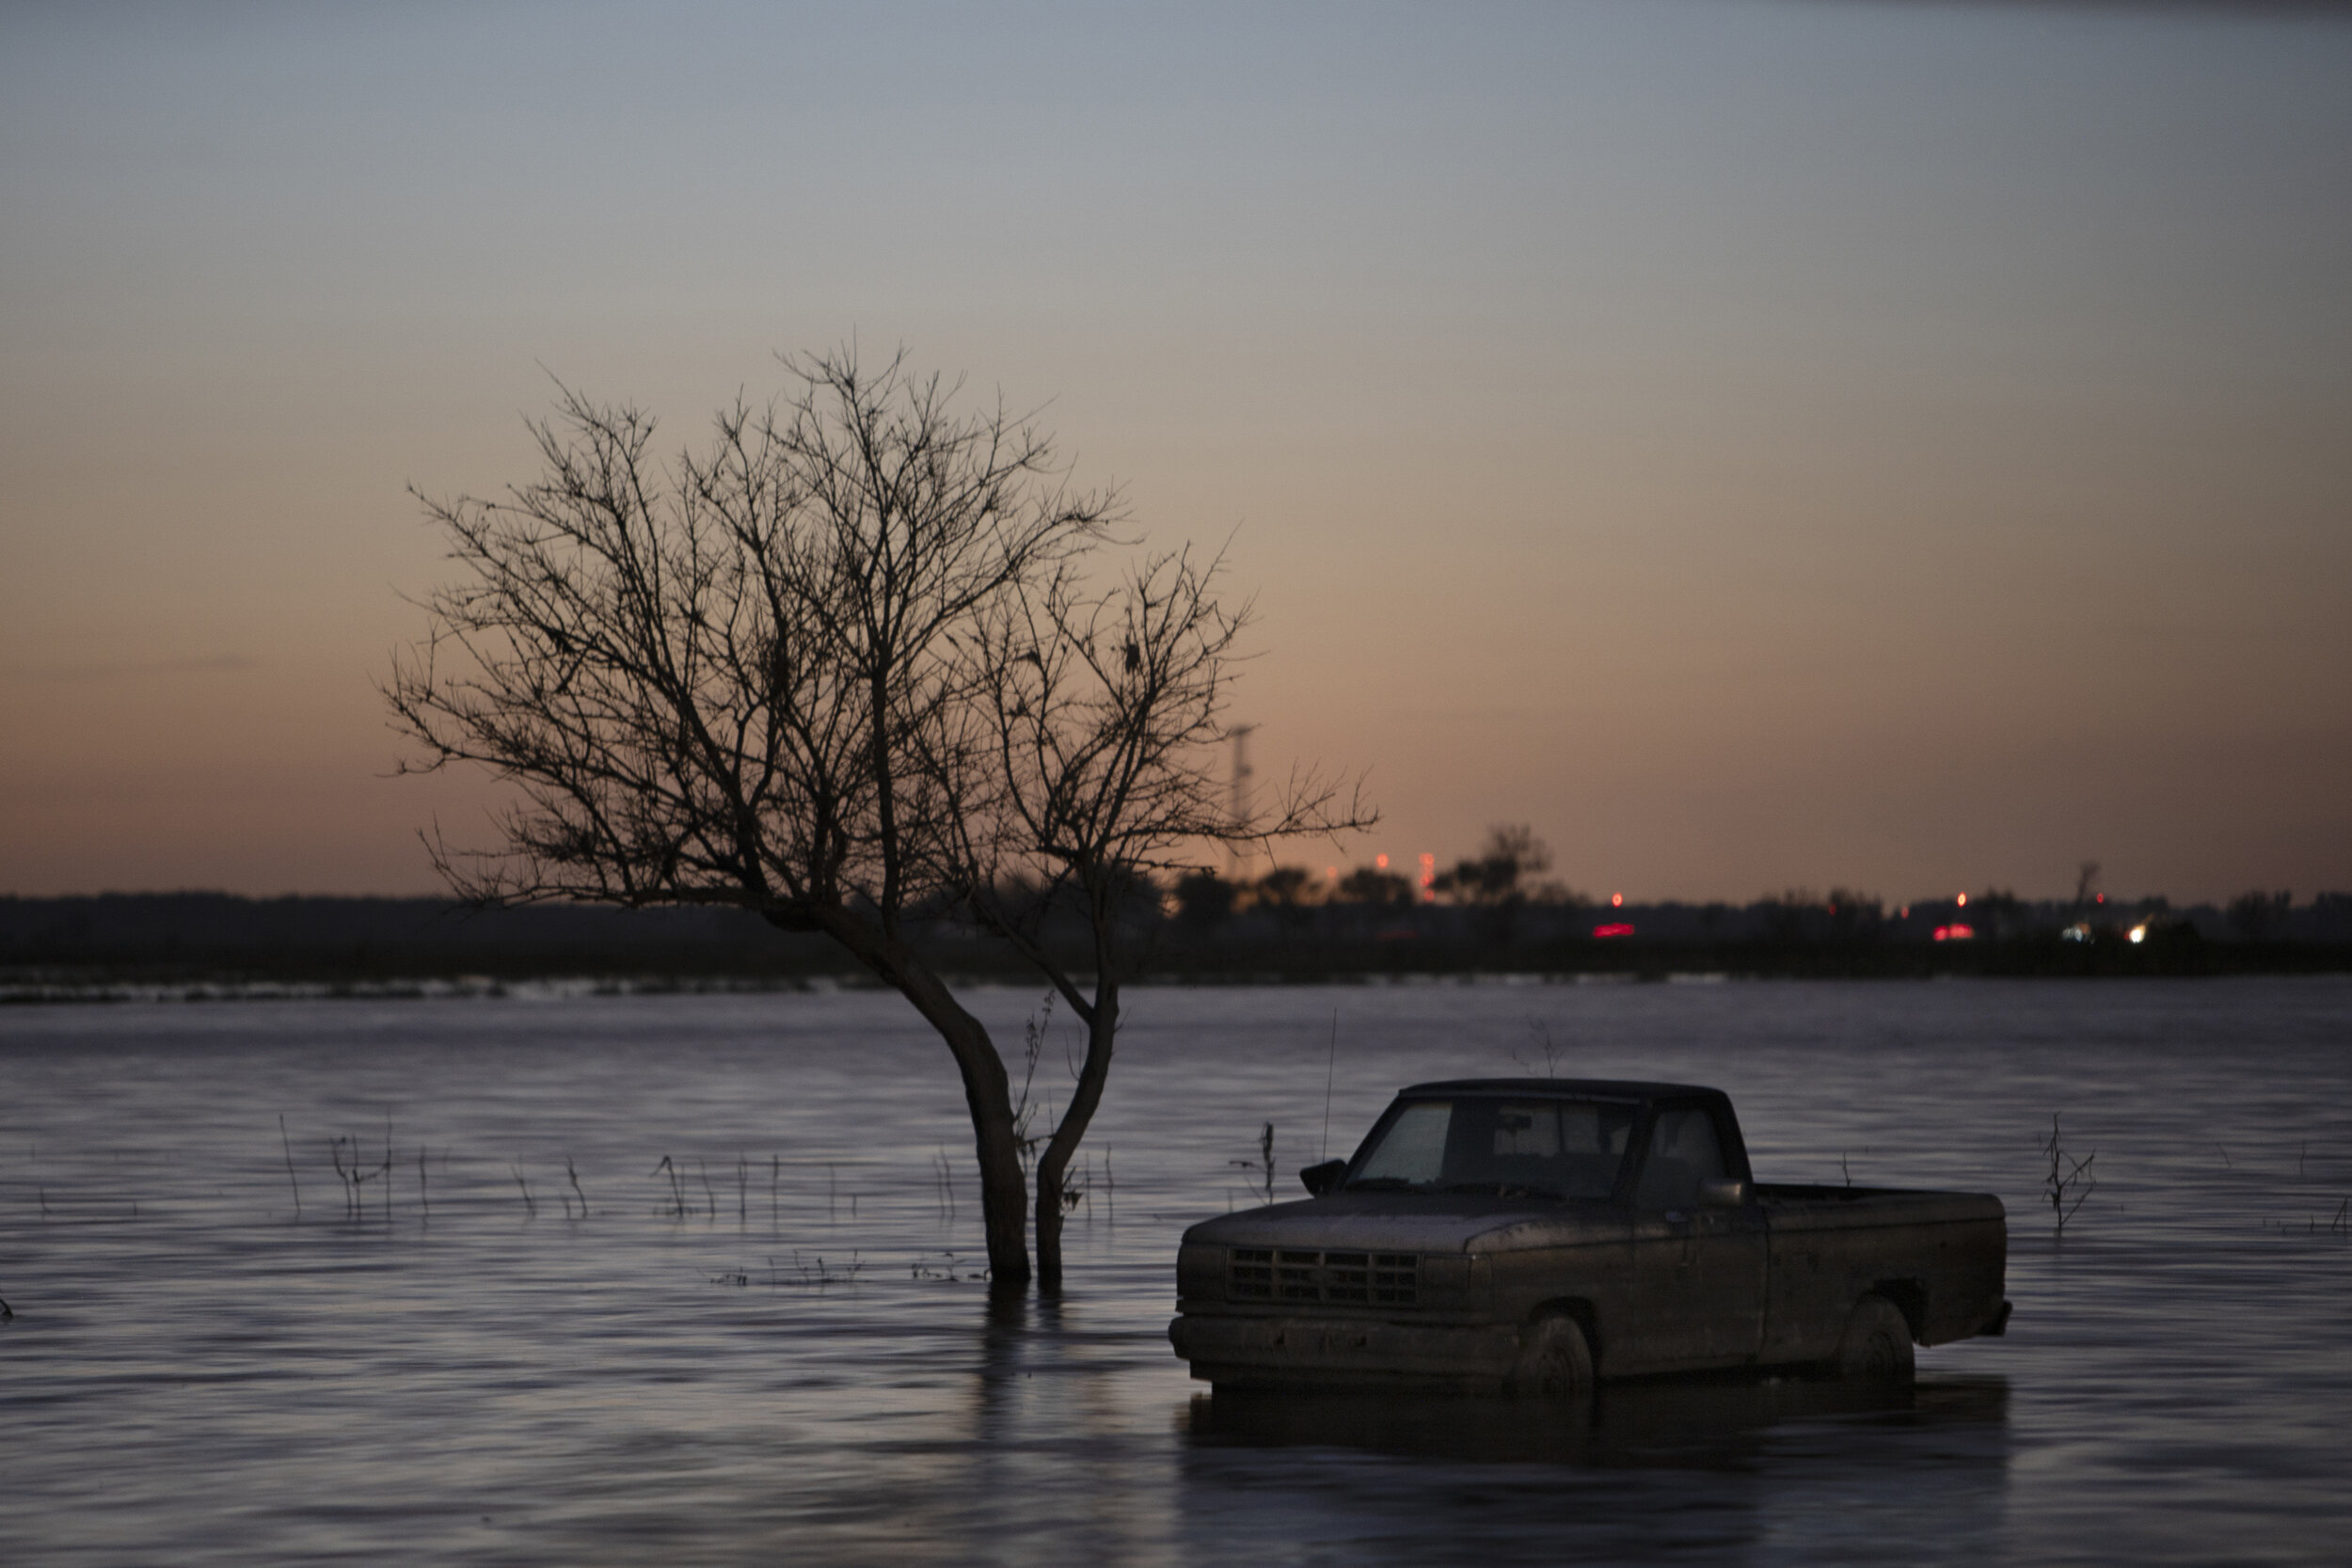   “Flooded out, farmers find work rebuilding the levees that failed them”   Photos: Ed Ou Role: Final select 